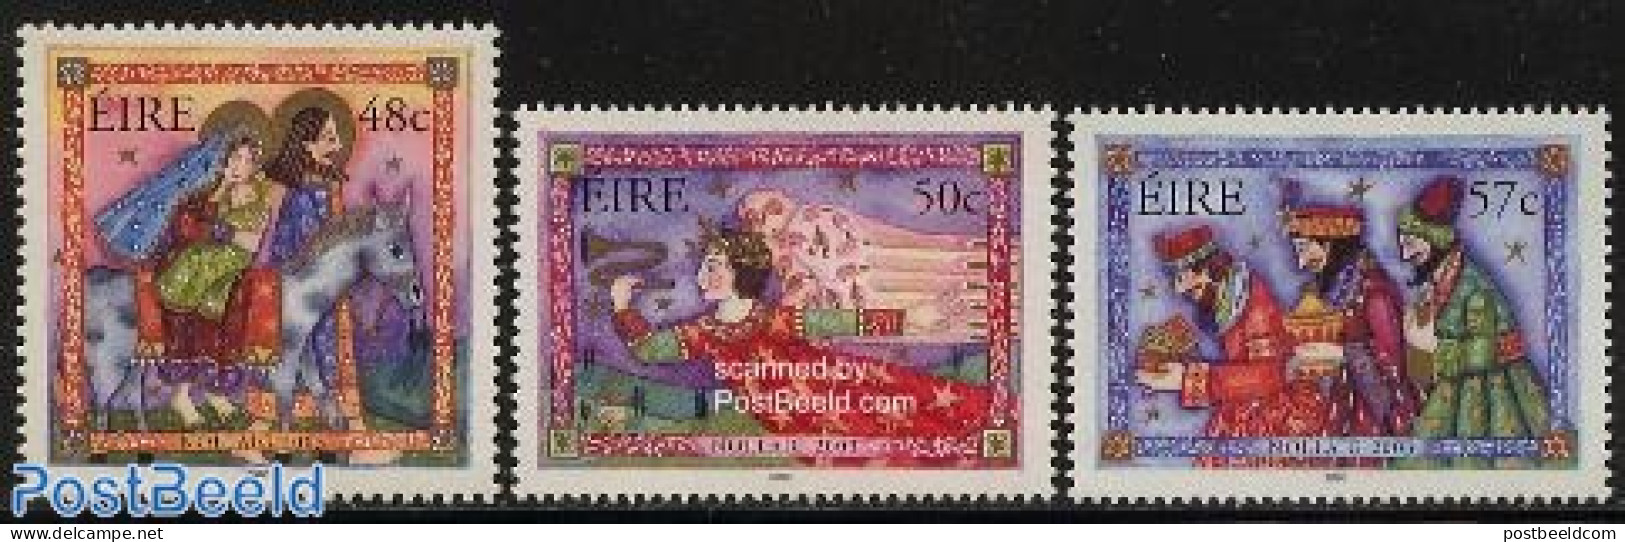 Ireland 2003 Christmas 3v, Mint NH, Religion - Angels - Christmas - Unused Stamps